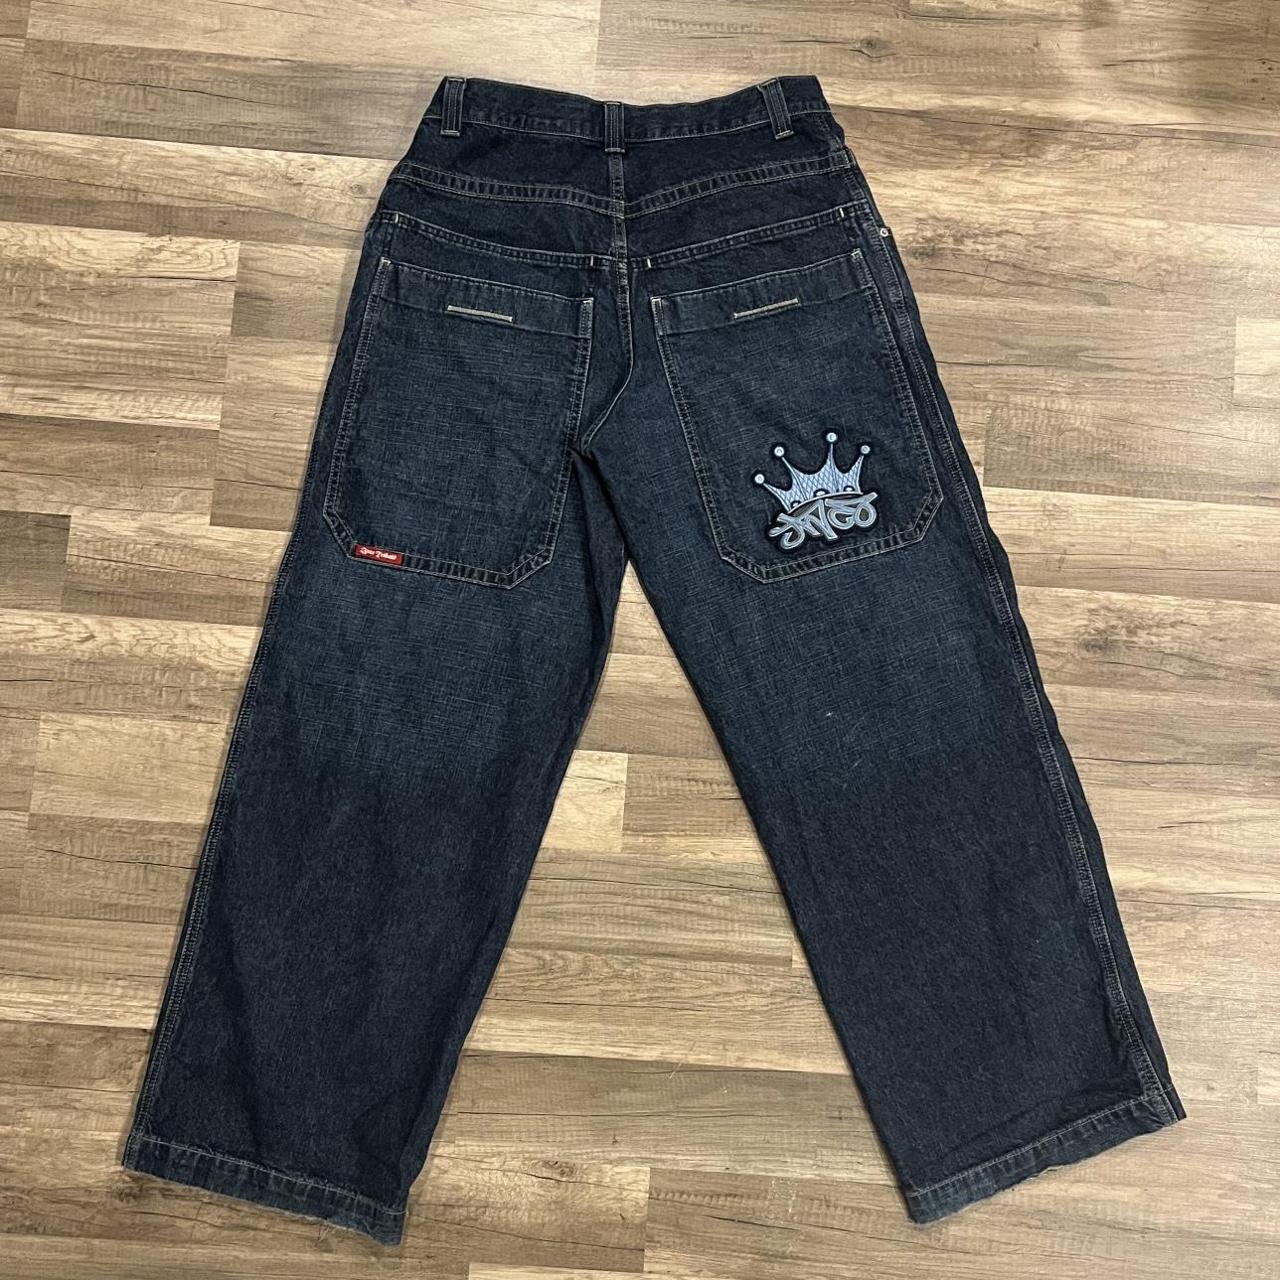 90s Jnco tribal crown jeans size 33x32 in perfect... - Depop